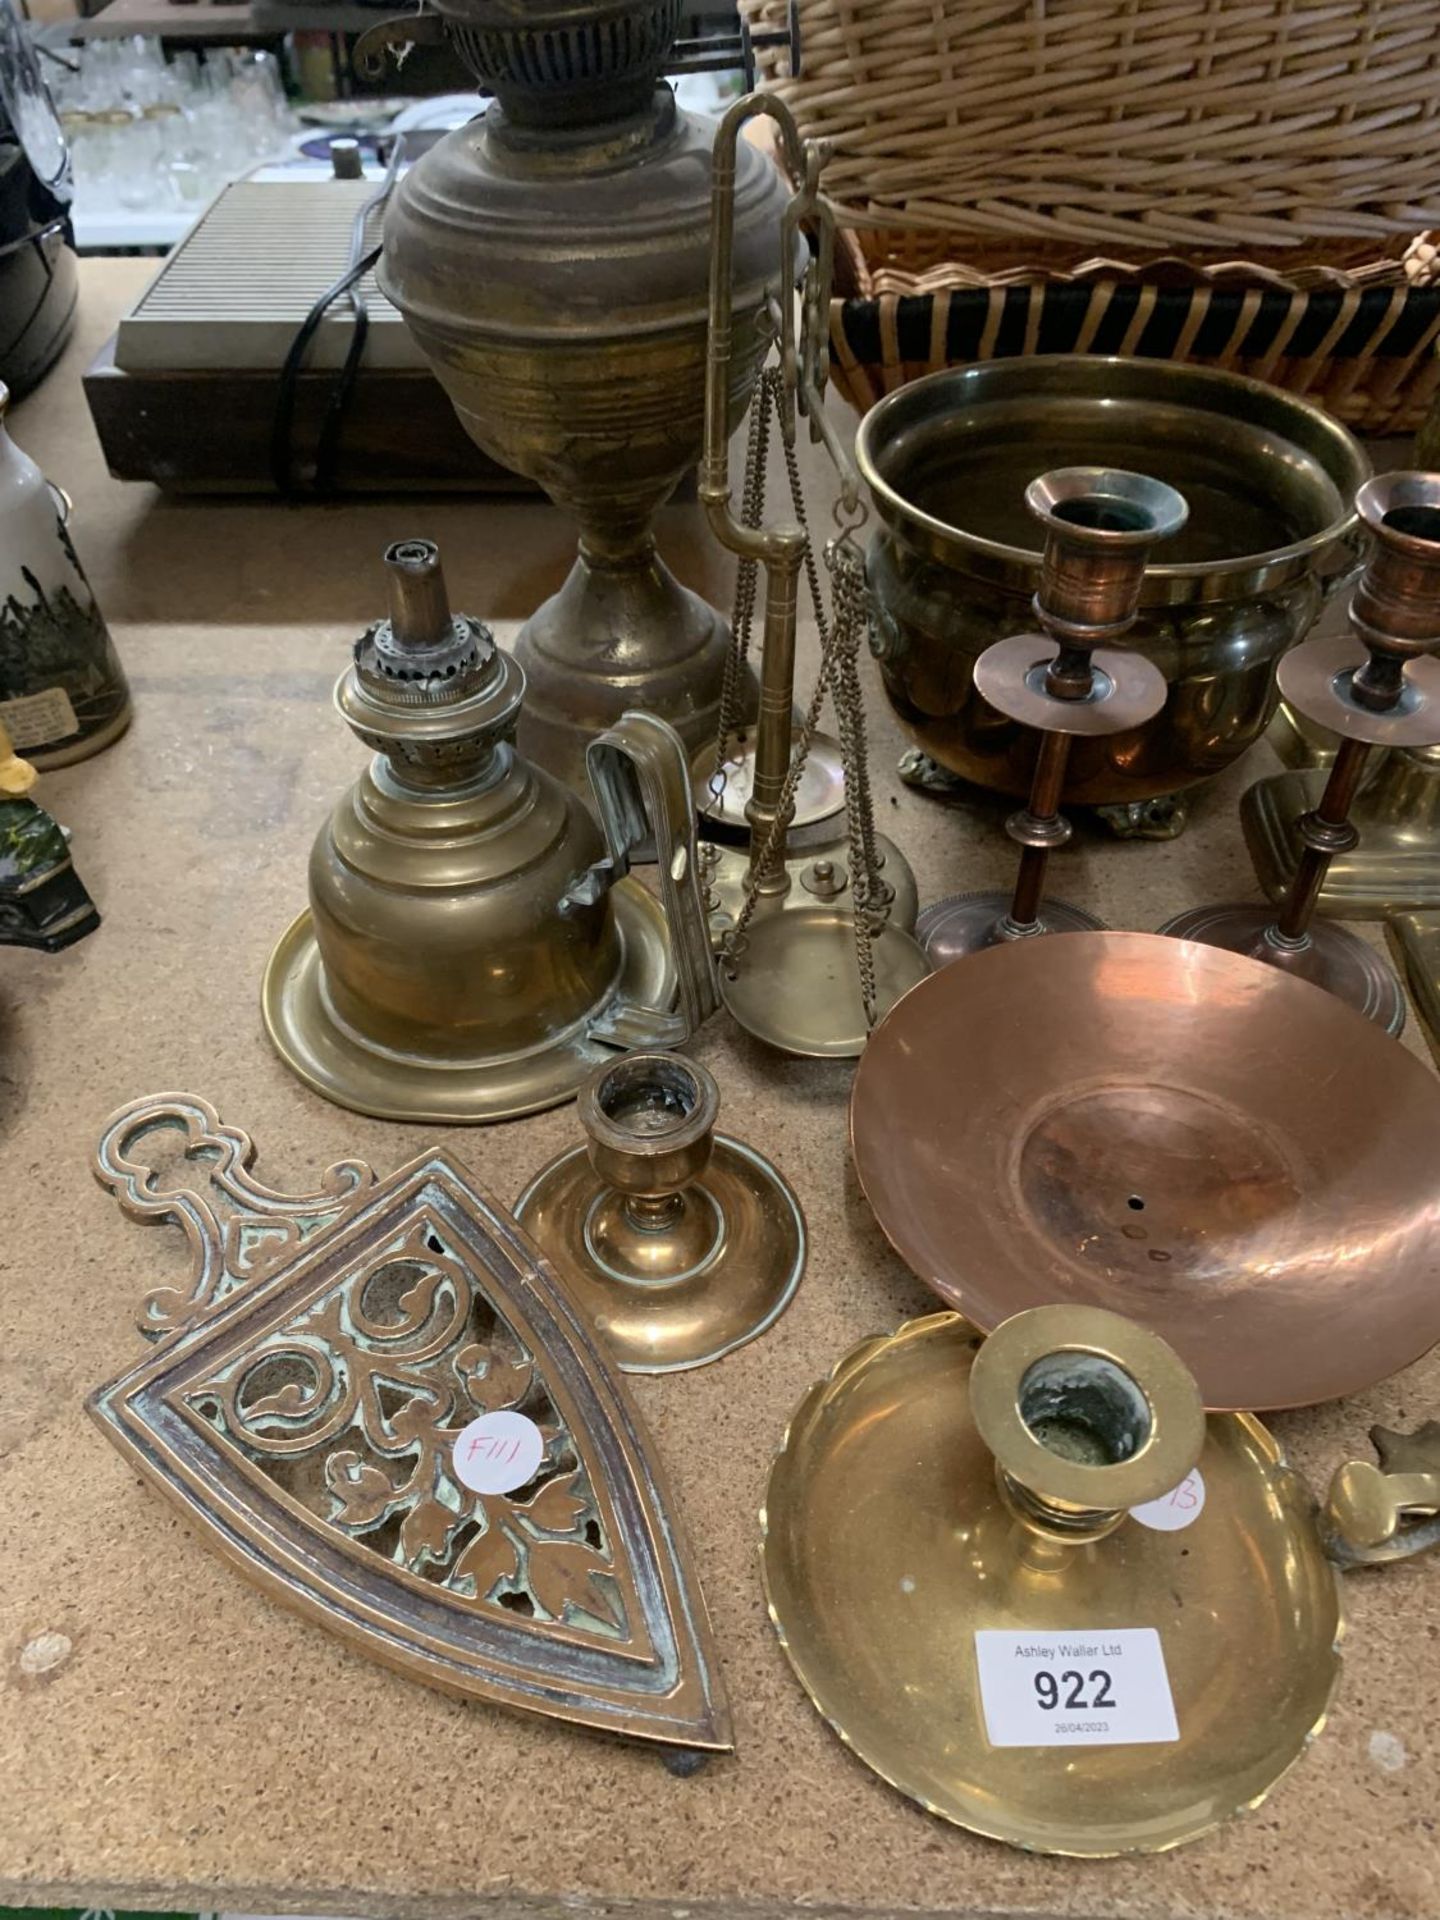 A LARGE QUANTITY OF BRASSWARE TO INCLUDE AN OIL LAMP, CANDLESTICKS, WEIGHING SCALES, ETC - Image 2 of 3